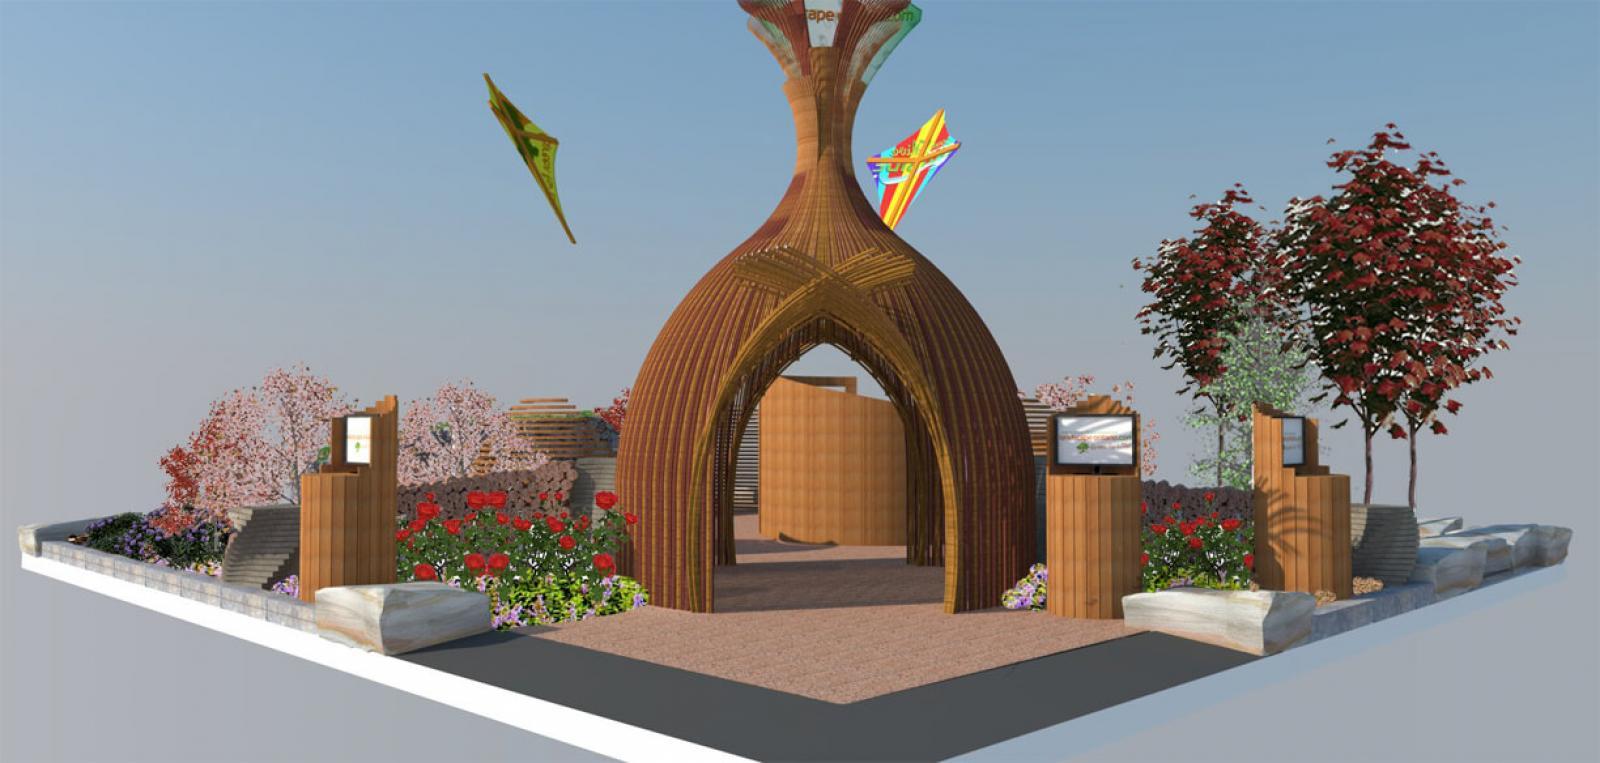 The entrance to this year’s LO garden has been deemed the awareness zone, where  facts about our current sedentary lifestyle will be displayed on modified computer monitors. The willow branch hut leads into our opportunity zone to find out how the green industry can help combat this damaging passive lifestyle.